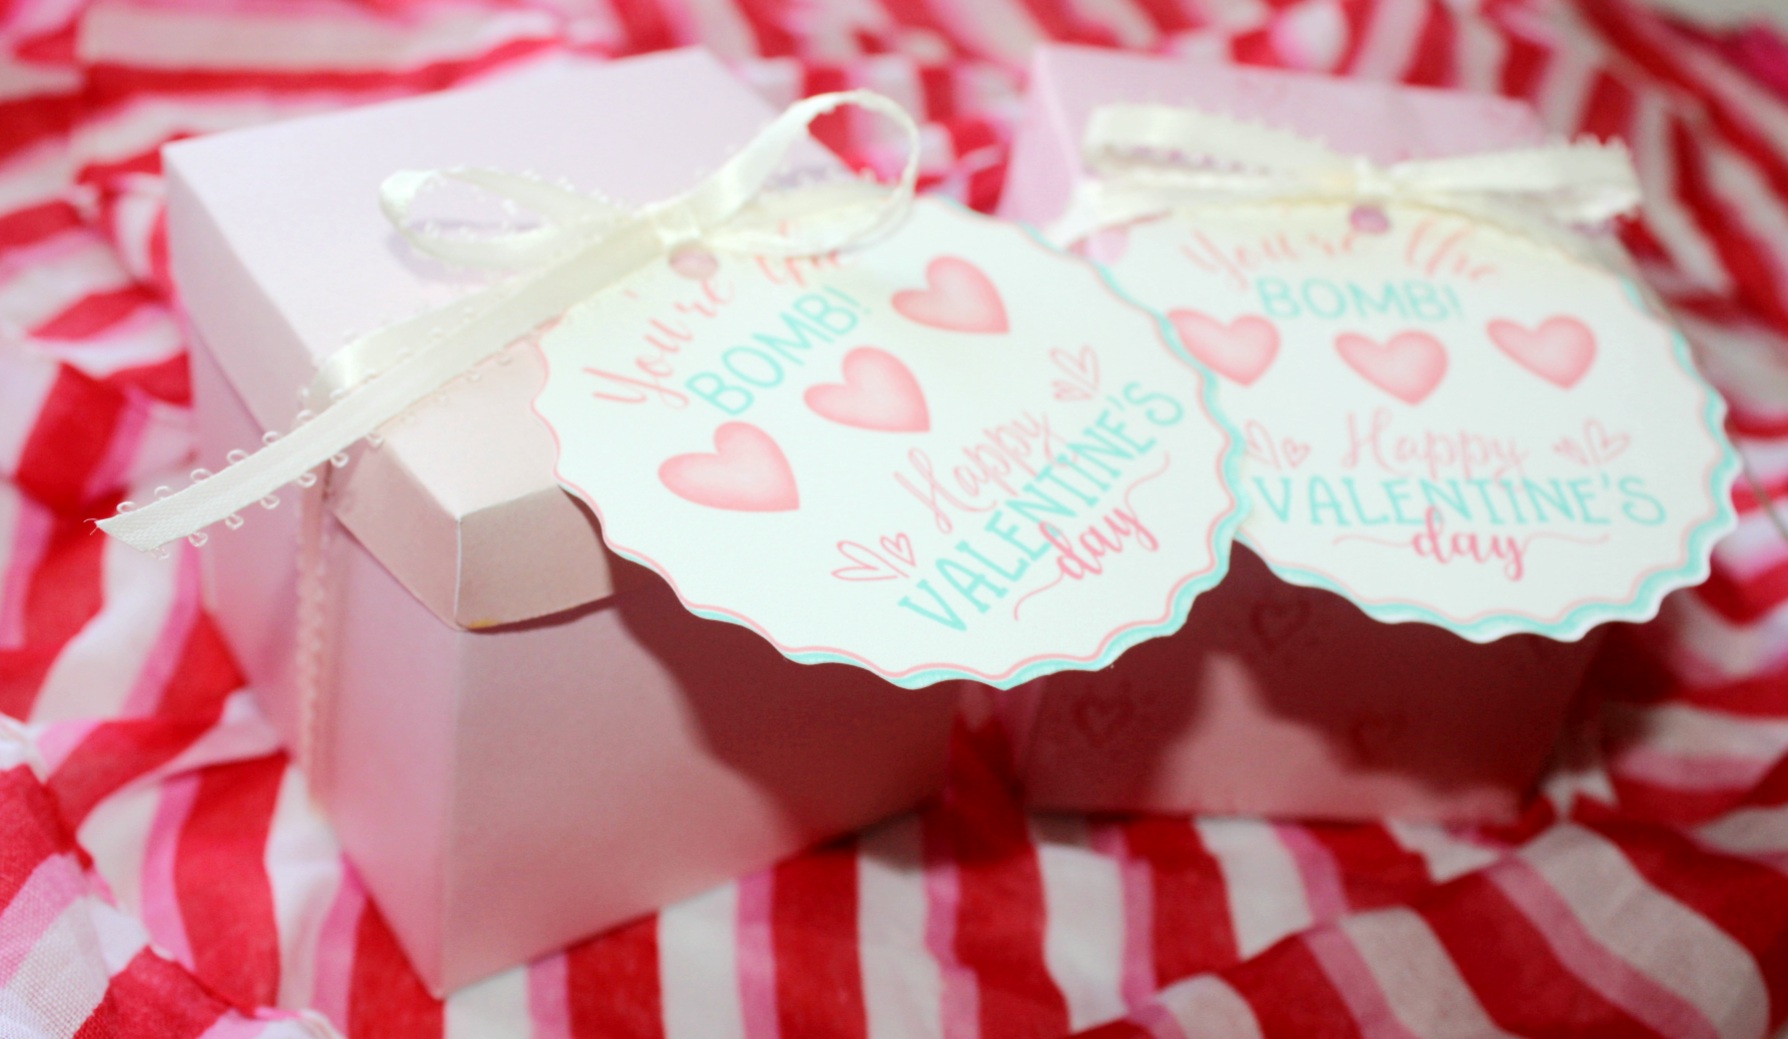 Two Valentine's Day teachers' gifts: bath bombs in a Valentine's Day print gift boxes with tags that say, "You're the BOMB! Happy Valentine's Day!"